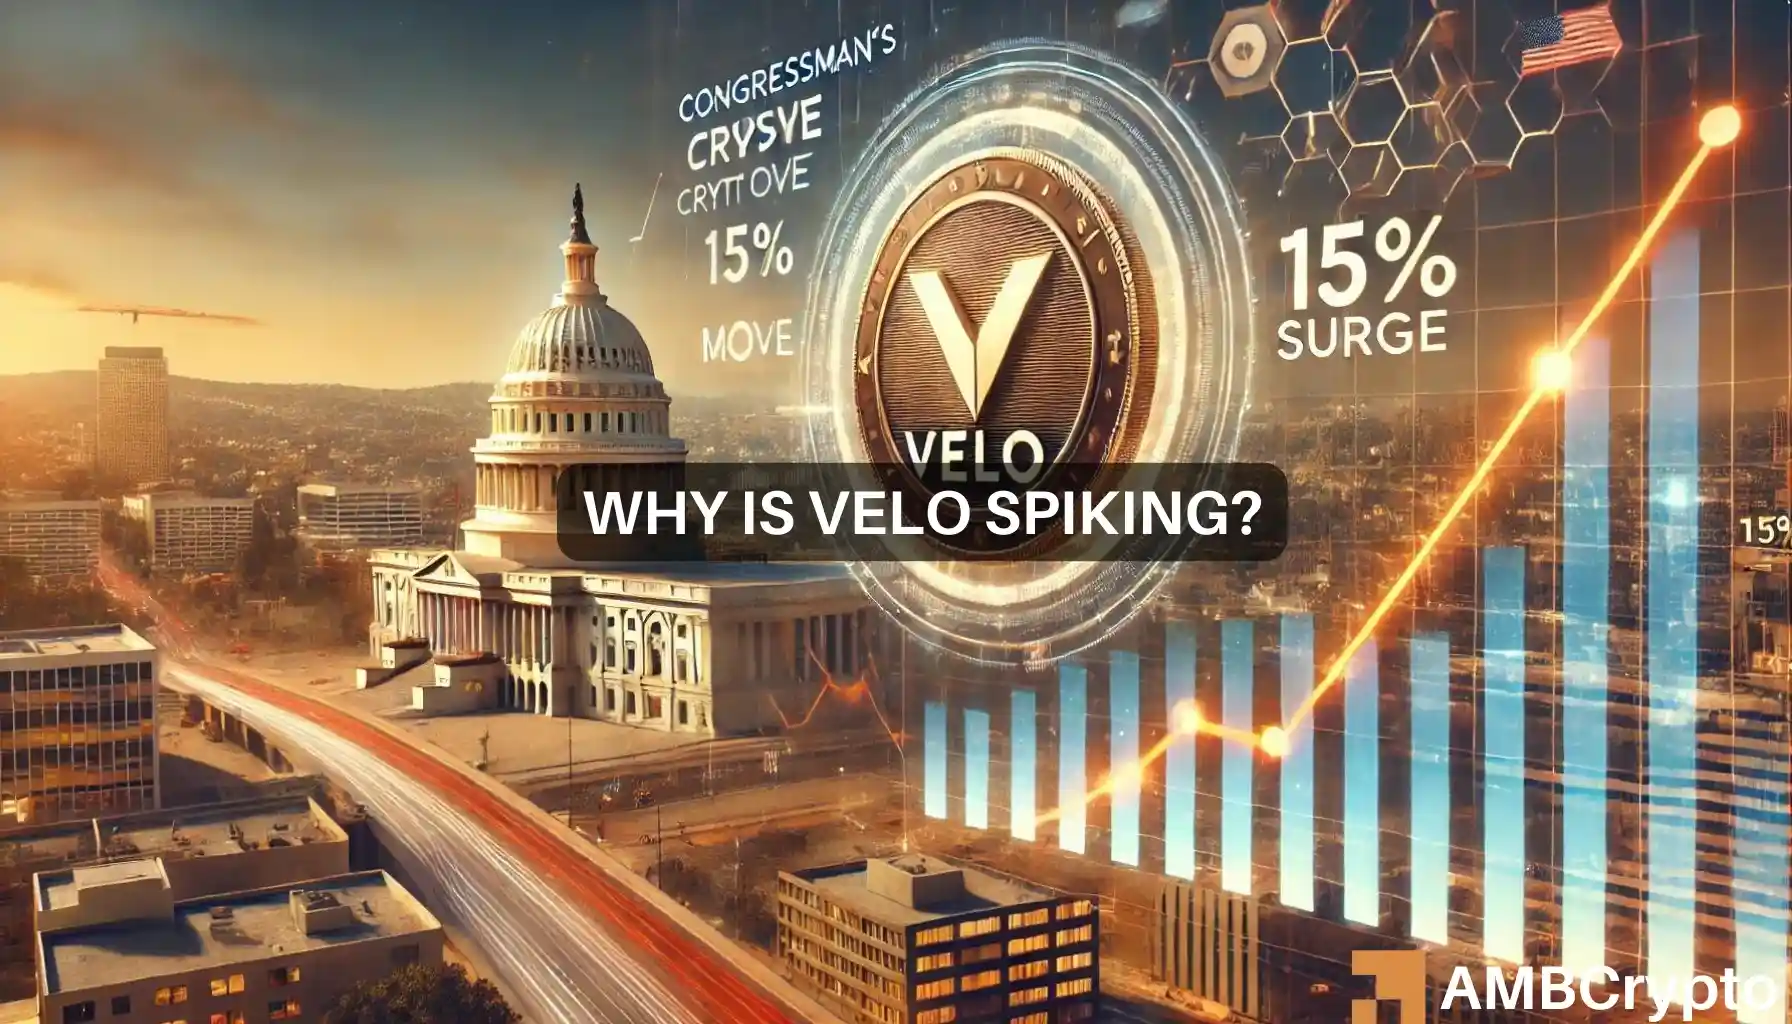 Velodrome rises 15% after Congressman’s purchase – Here’s everything to know